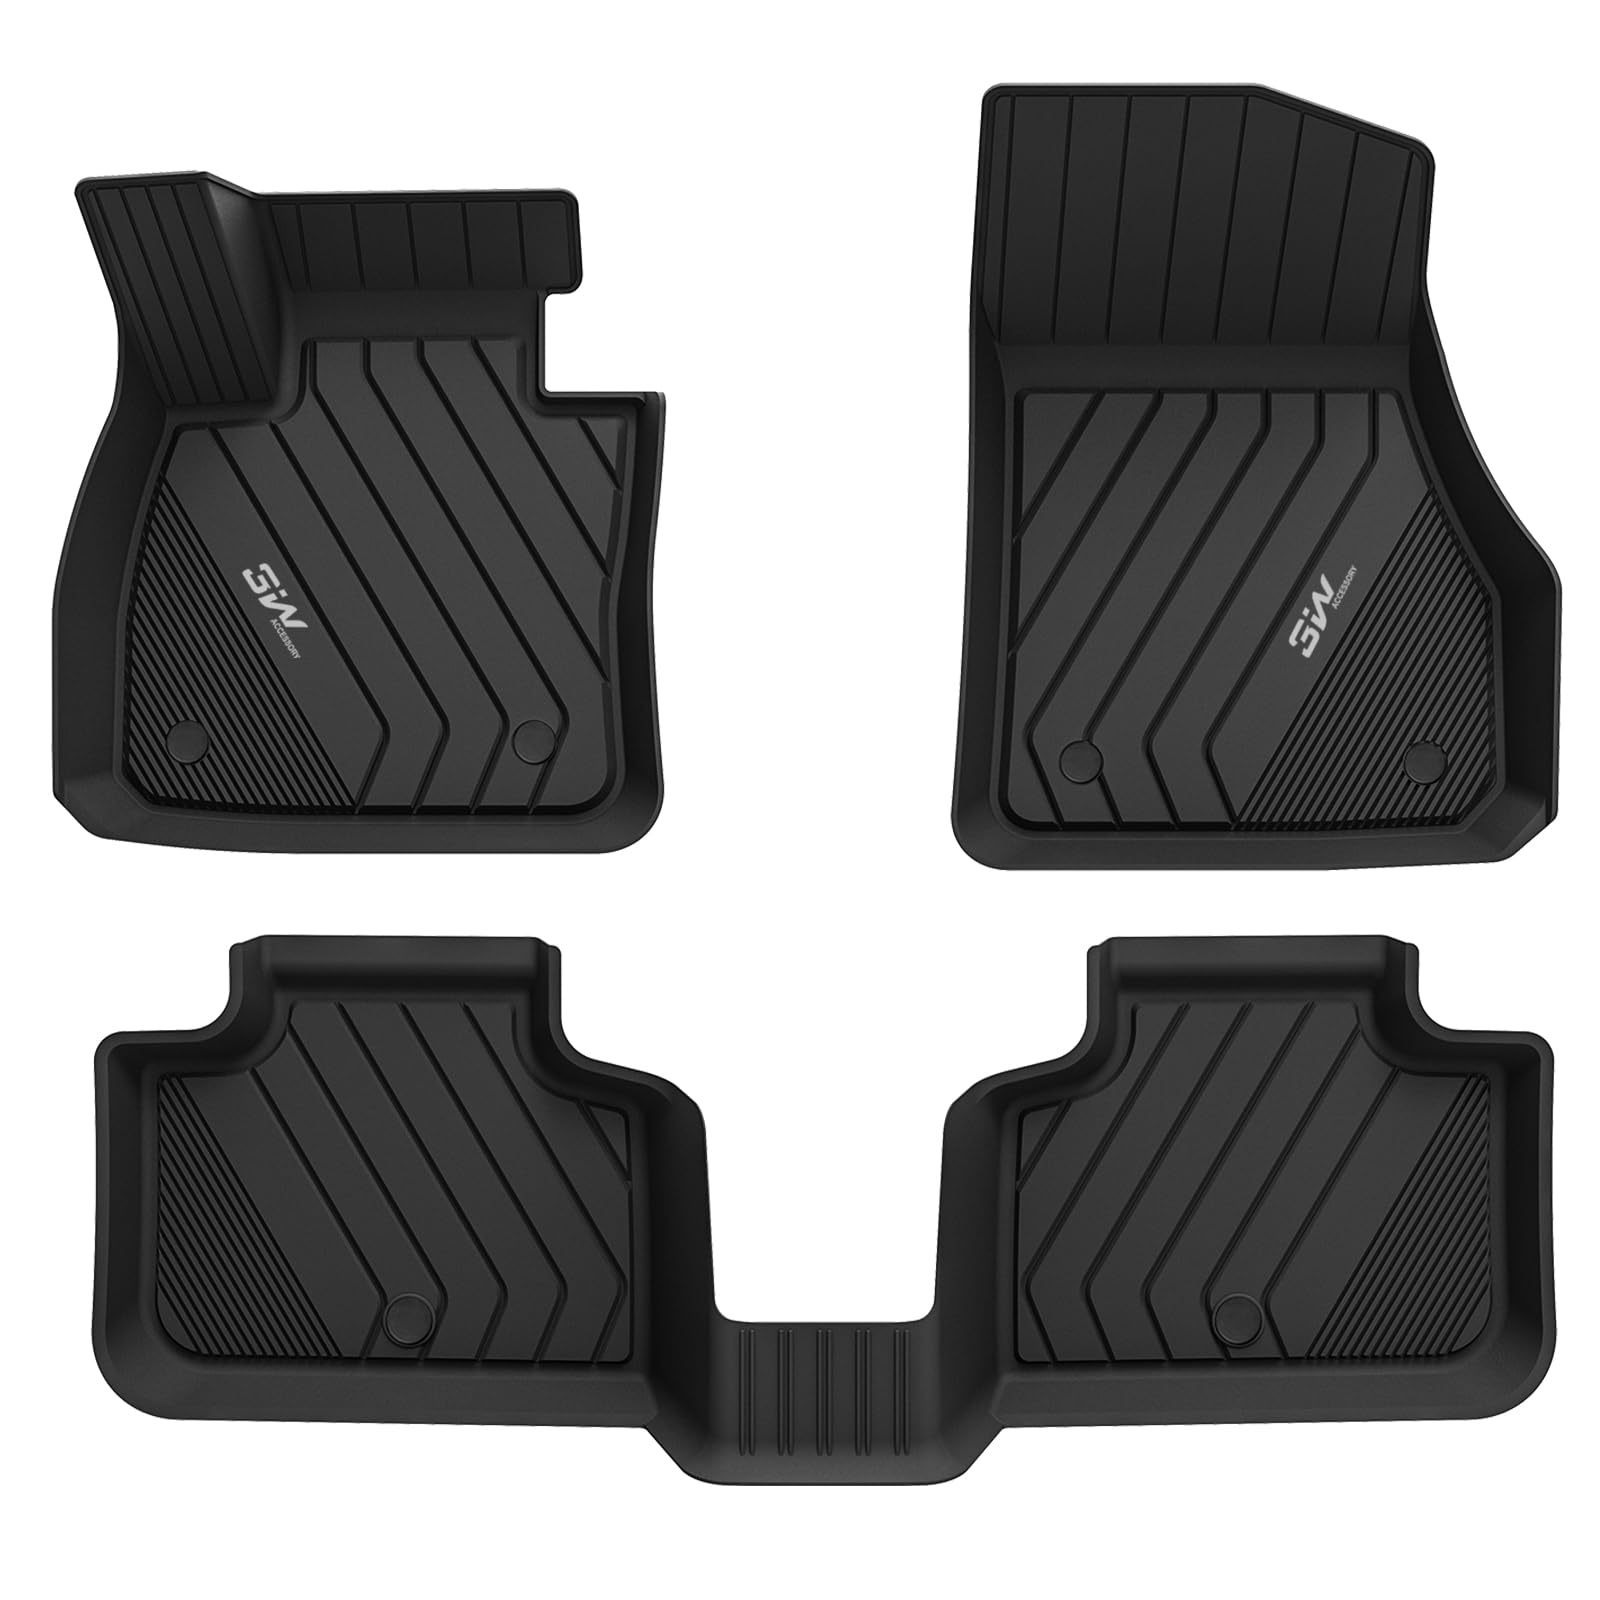 3W BMW X2 2018-2023 Custom Floor Mats TPE Material & All-Weather Protection Vehicles & Parts 3W 2018-2023 X2 2018-2023 1st&2nd Row Mats